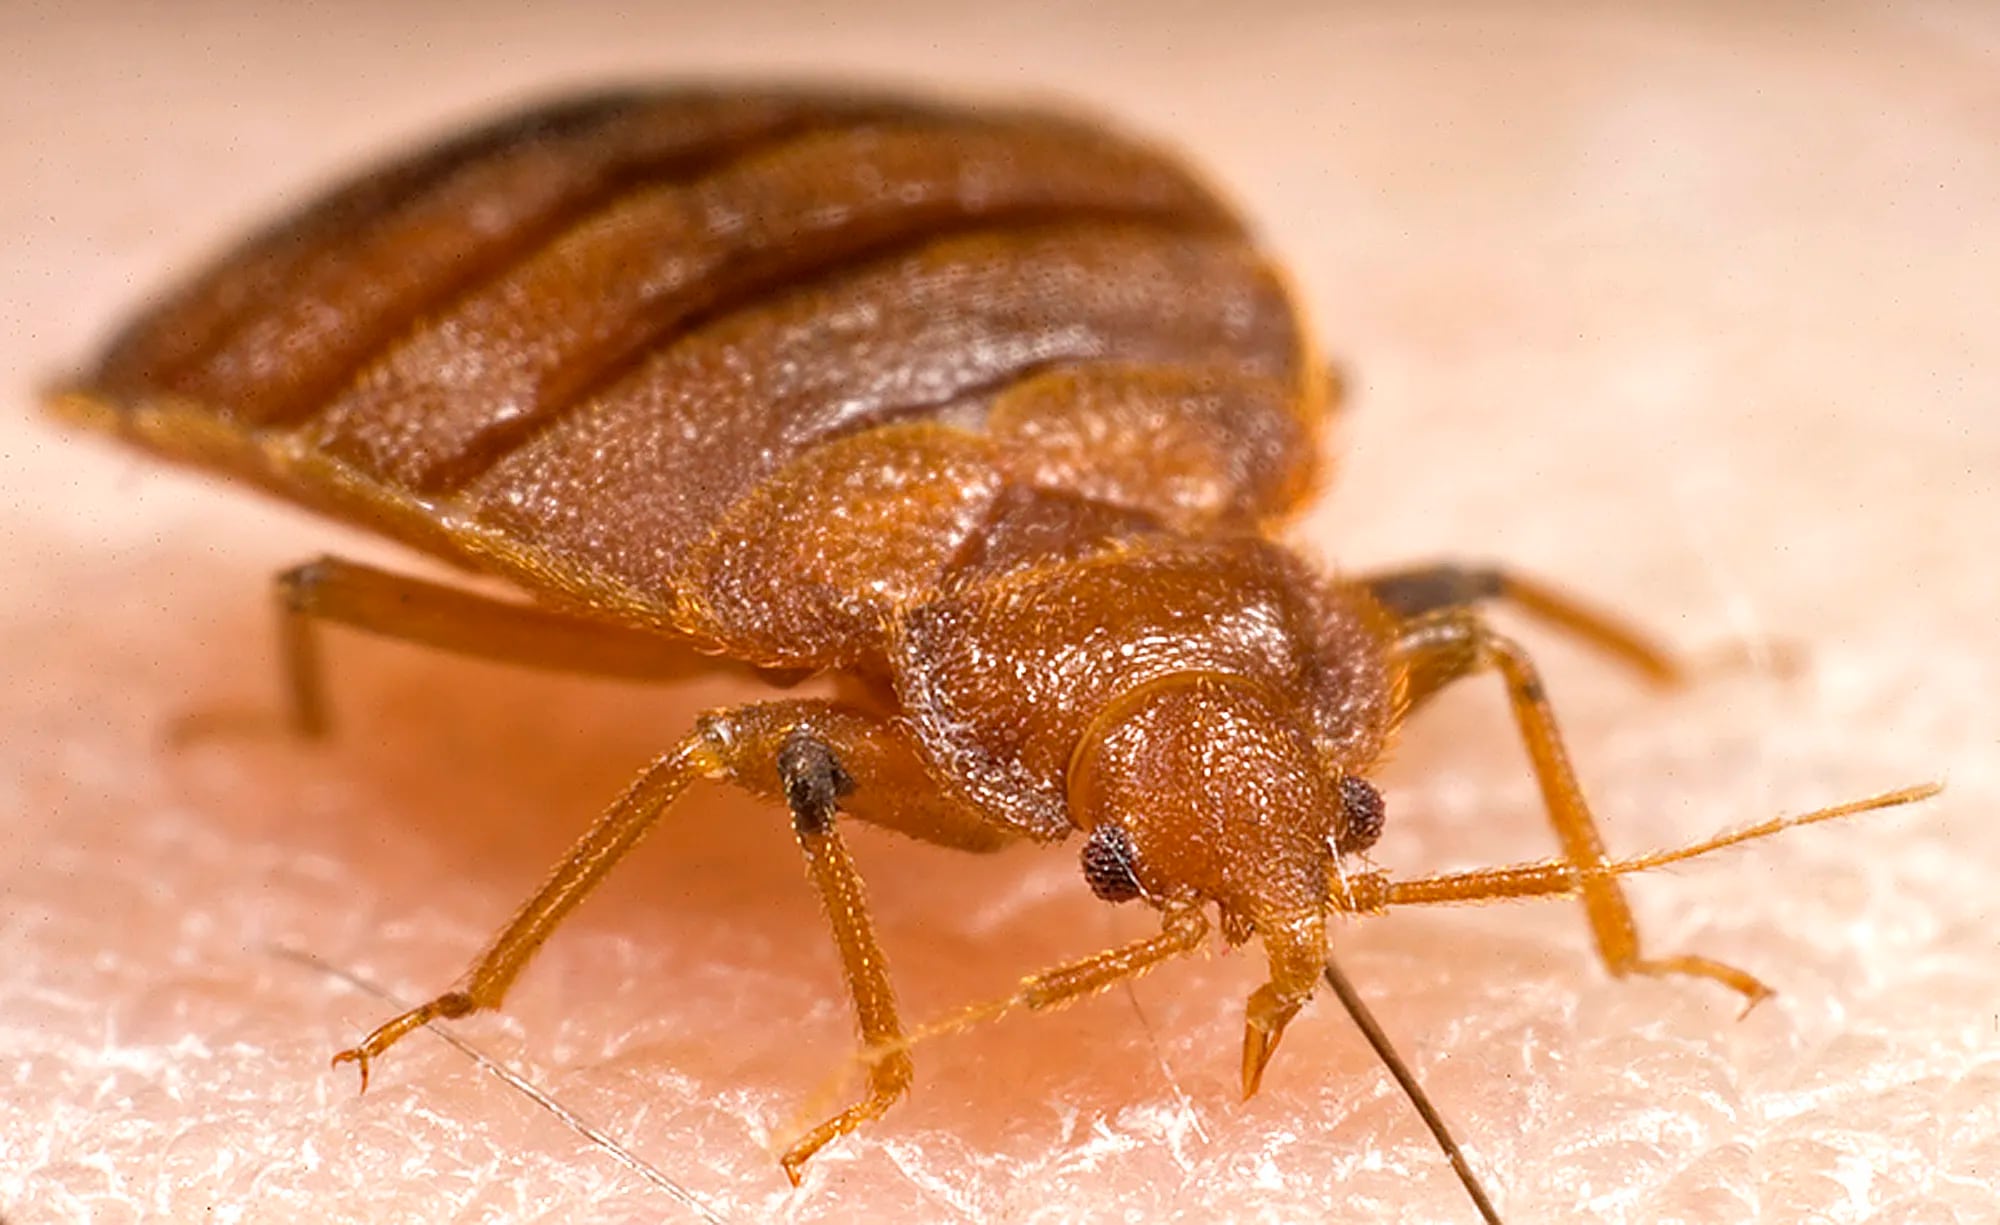 Adult bed bug in the process of ingesting a blood meal from the arm of a “voluntary” human host. The common bed bug is a wingless, red-brown, blood-sucking insect that grows up to 7 mm in length and has a lifespan from 4 months up to 1 year. Bed bugs hide in cracks and crevices in beds, wooden furniture, floors, and walls during the daytime and emerge at night to feed on their preferred host, humans. (Photo: Piotr Naskrecki / CDC  / Harvard University, 2006)